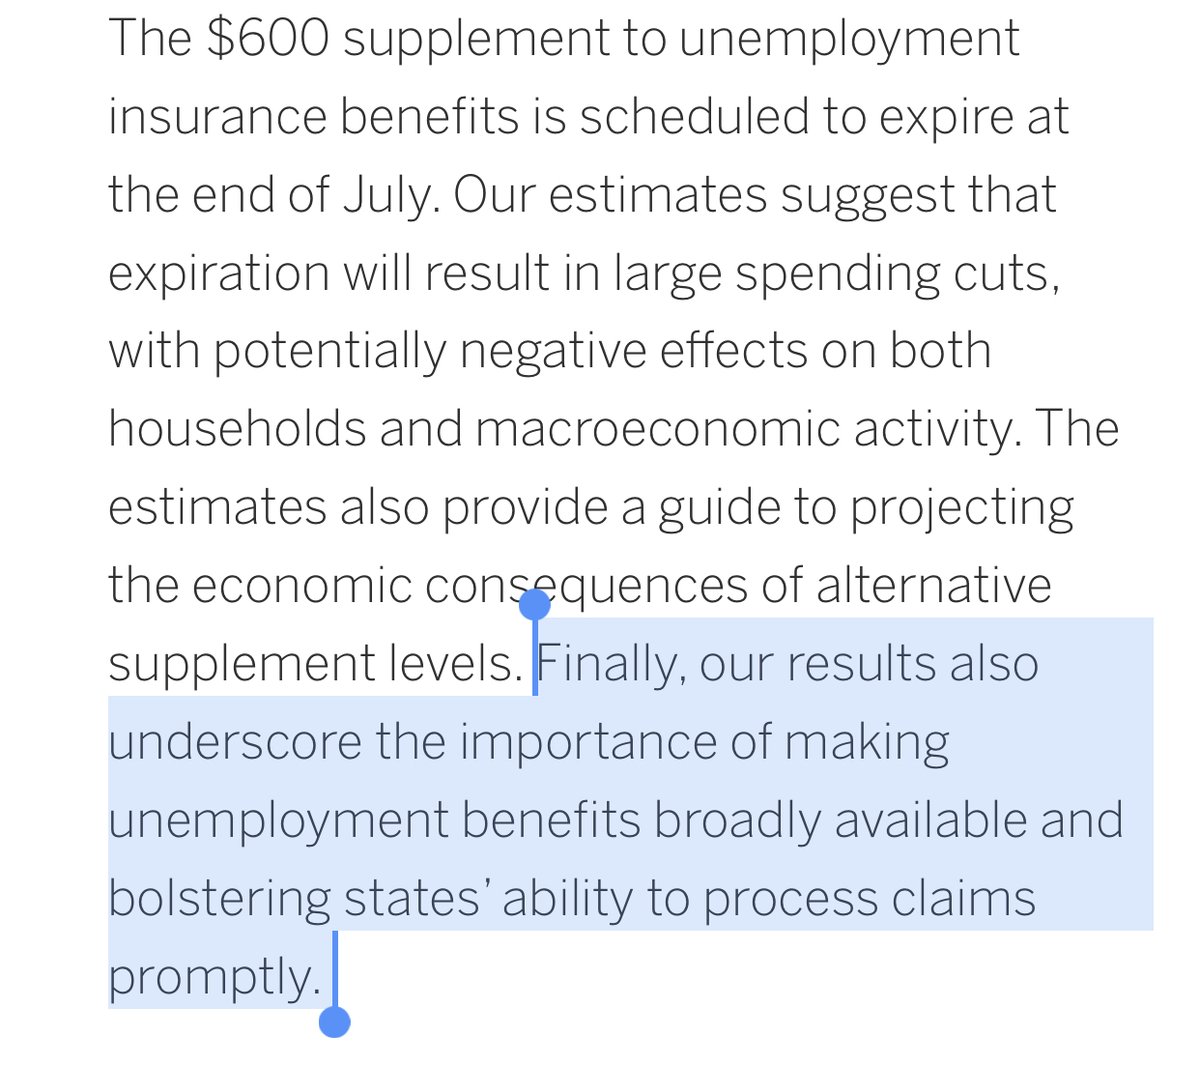 One other thing. It’s not just us crazy legislators who are critical of the insane delays in unemployment processing. JP Morgan, not your typical lefty outfit, points out the real harms of “longer processing delays” and the need for a better overall system. Cc:  @Jobs4_TN